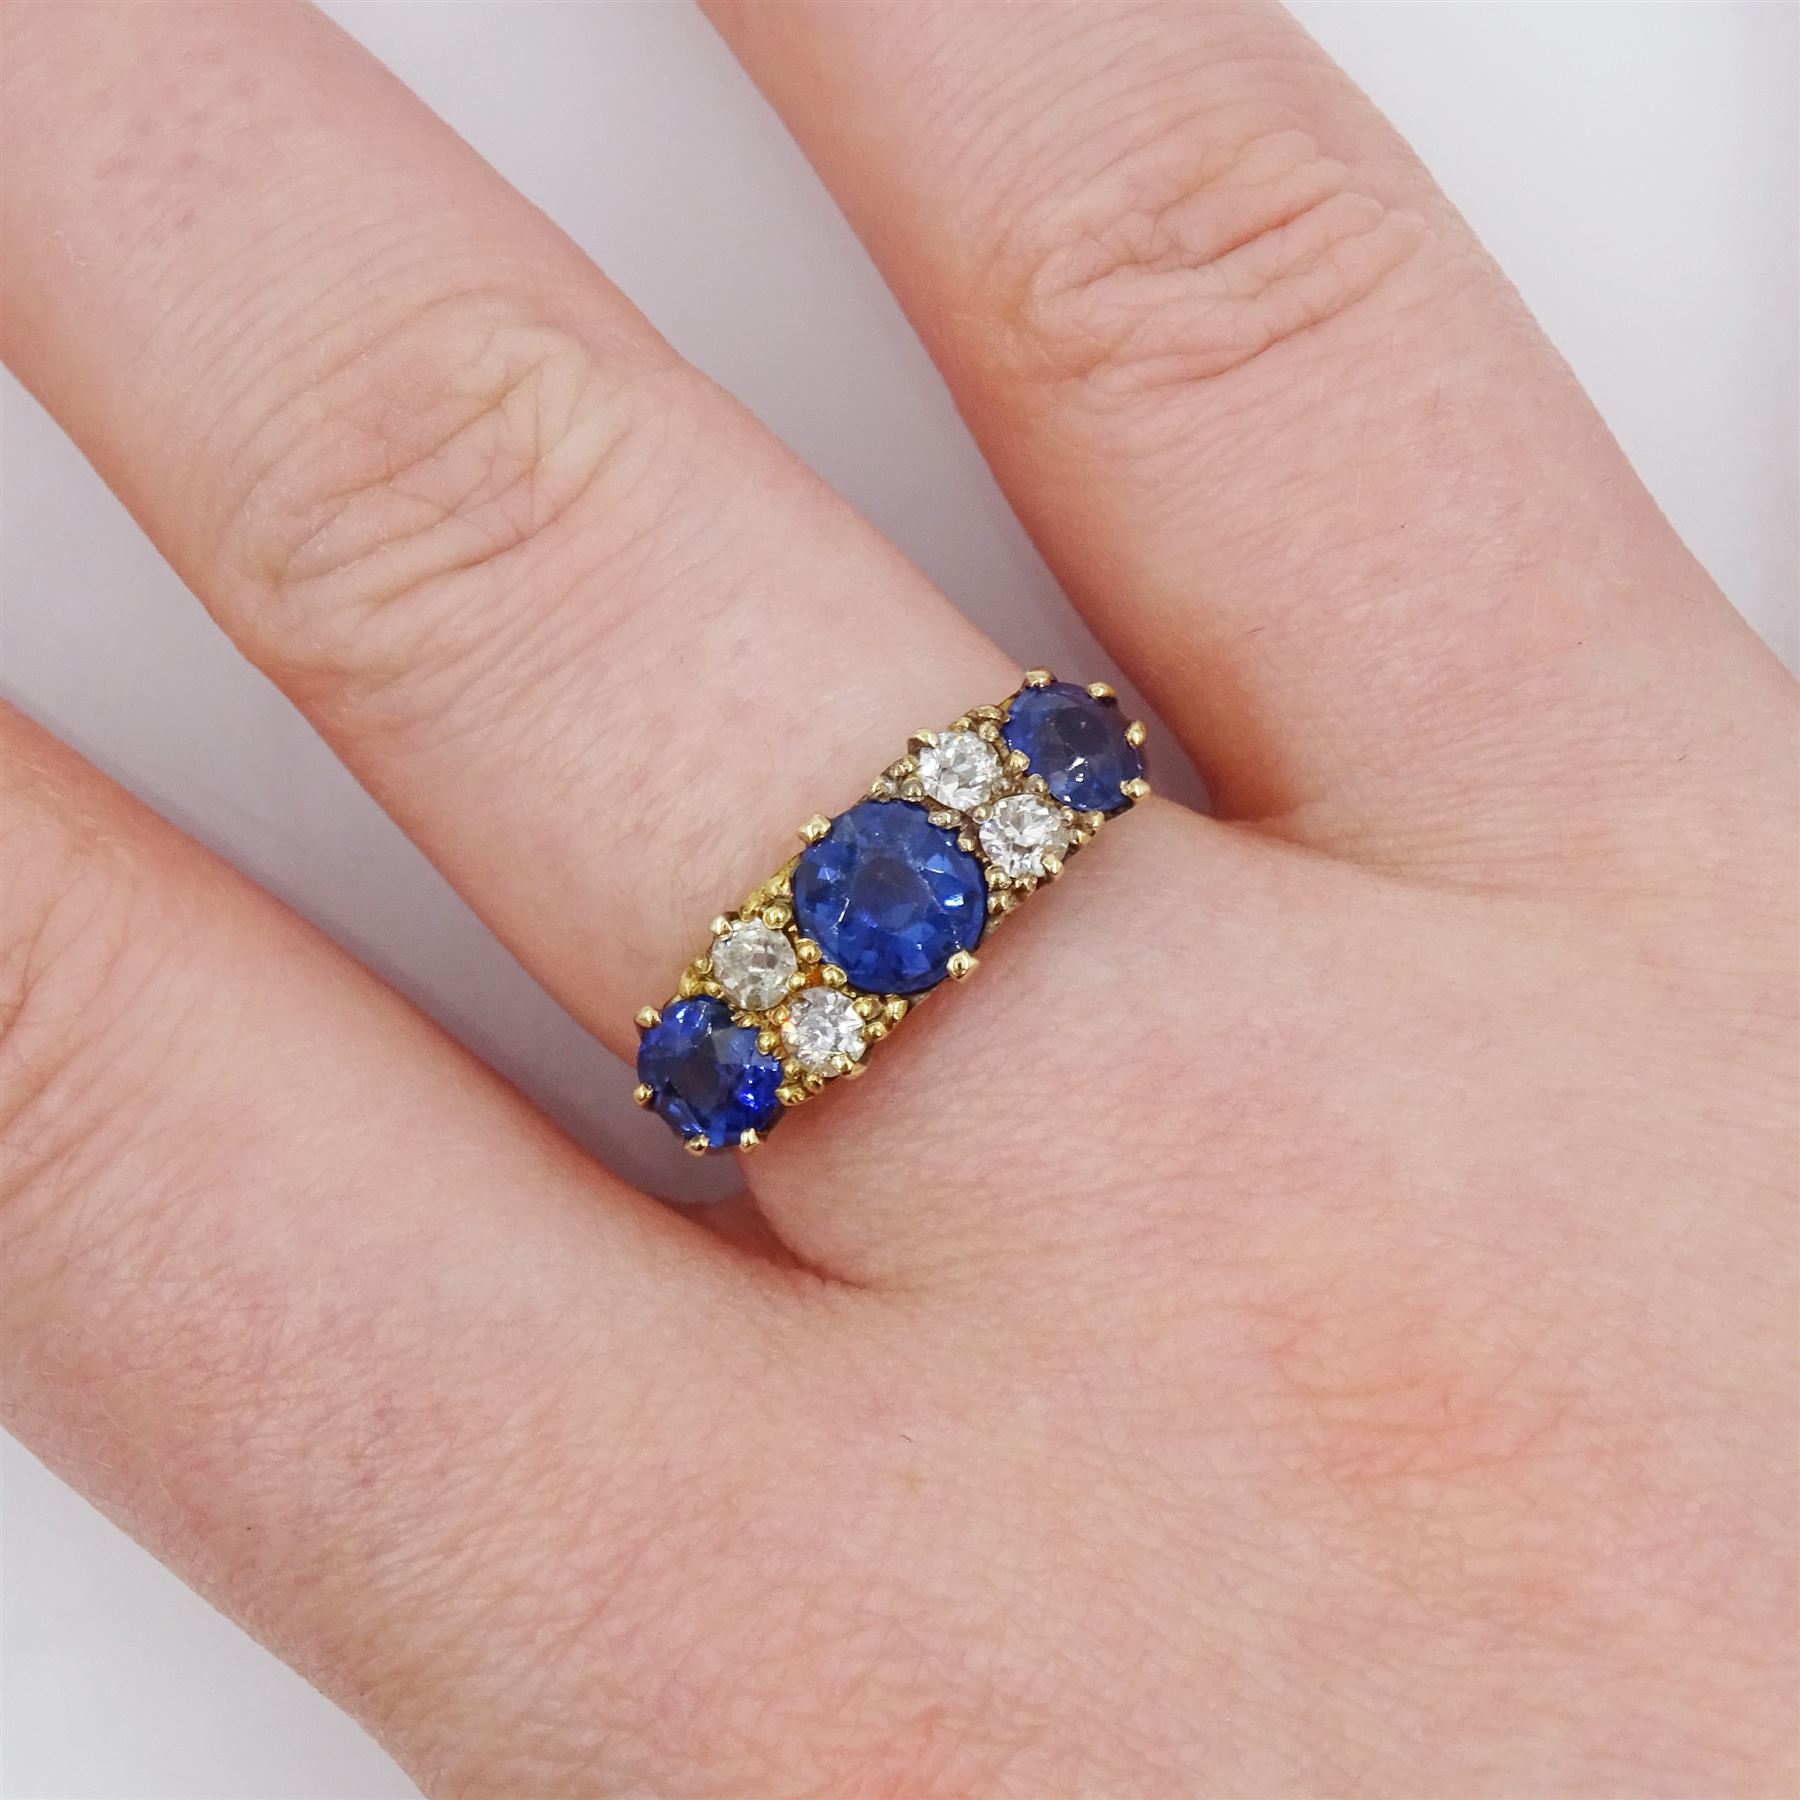 Early 20th century 18ct gold three stone cushion cut sapphire and four stone old cut diamond ring - Image 2 of 4